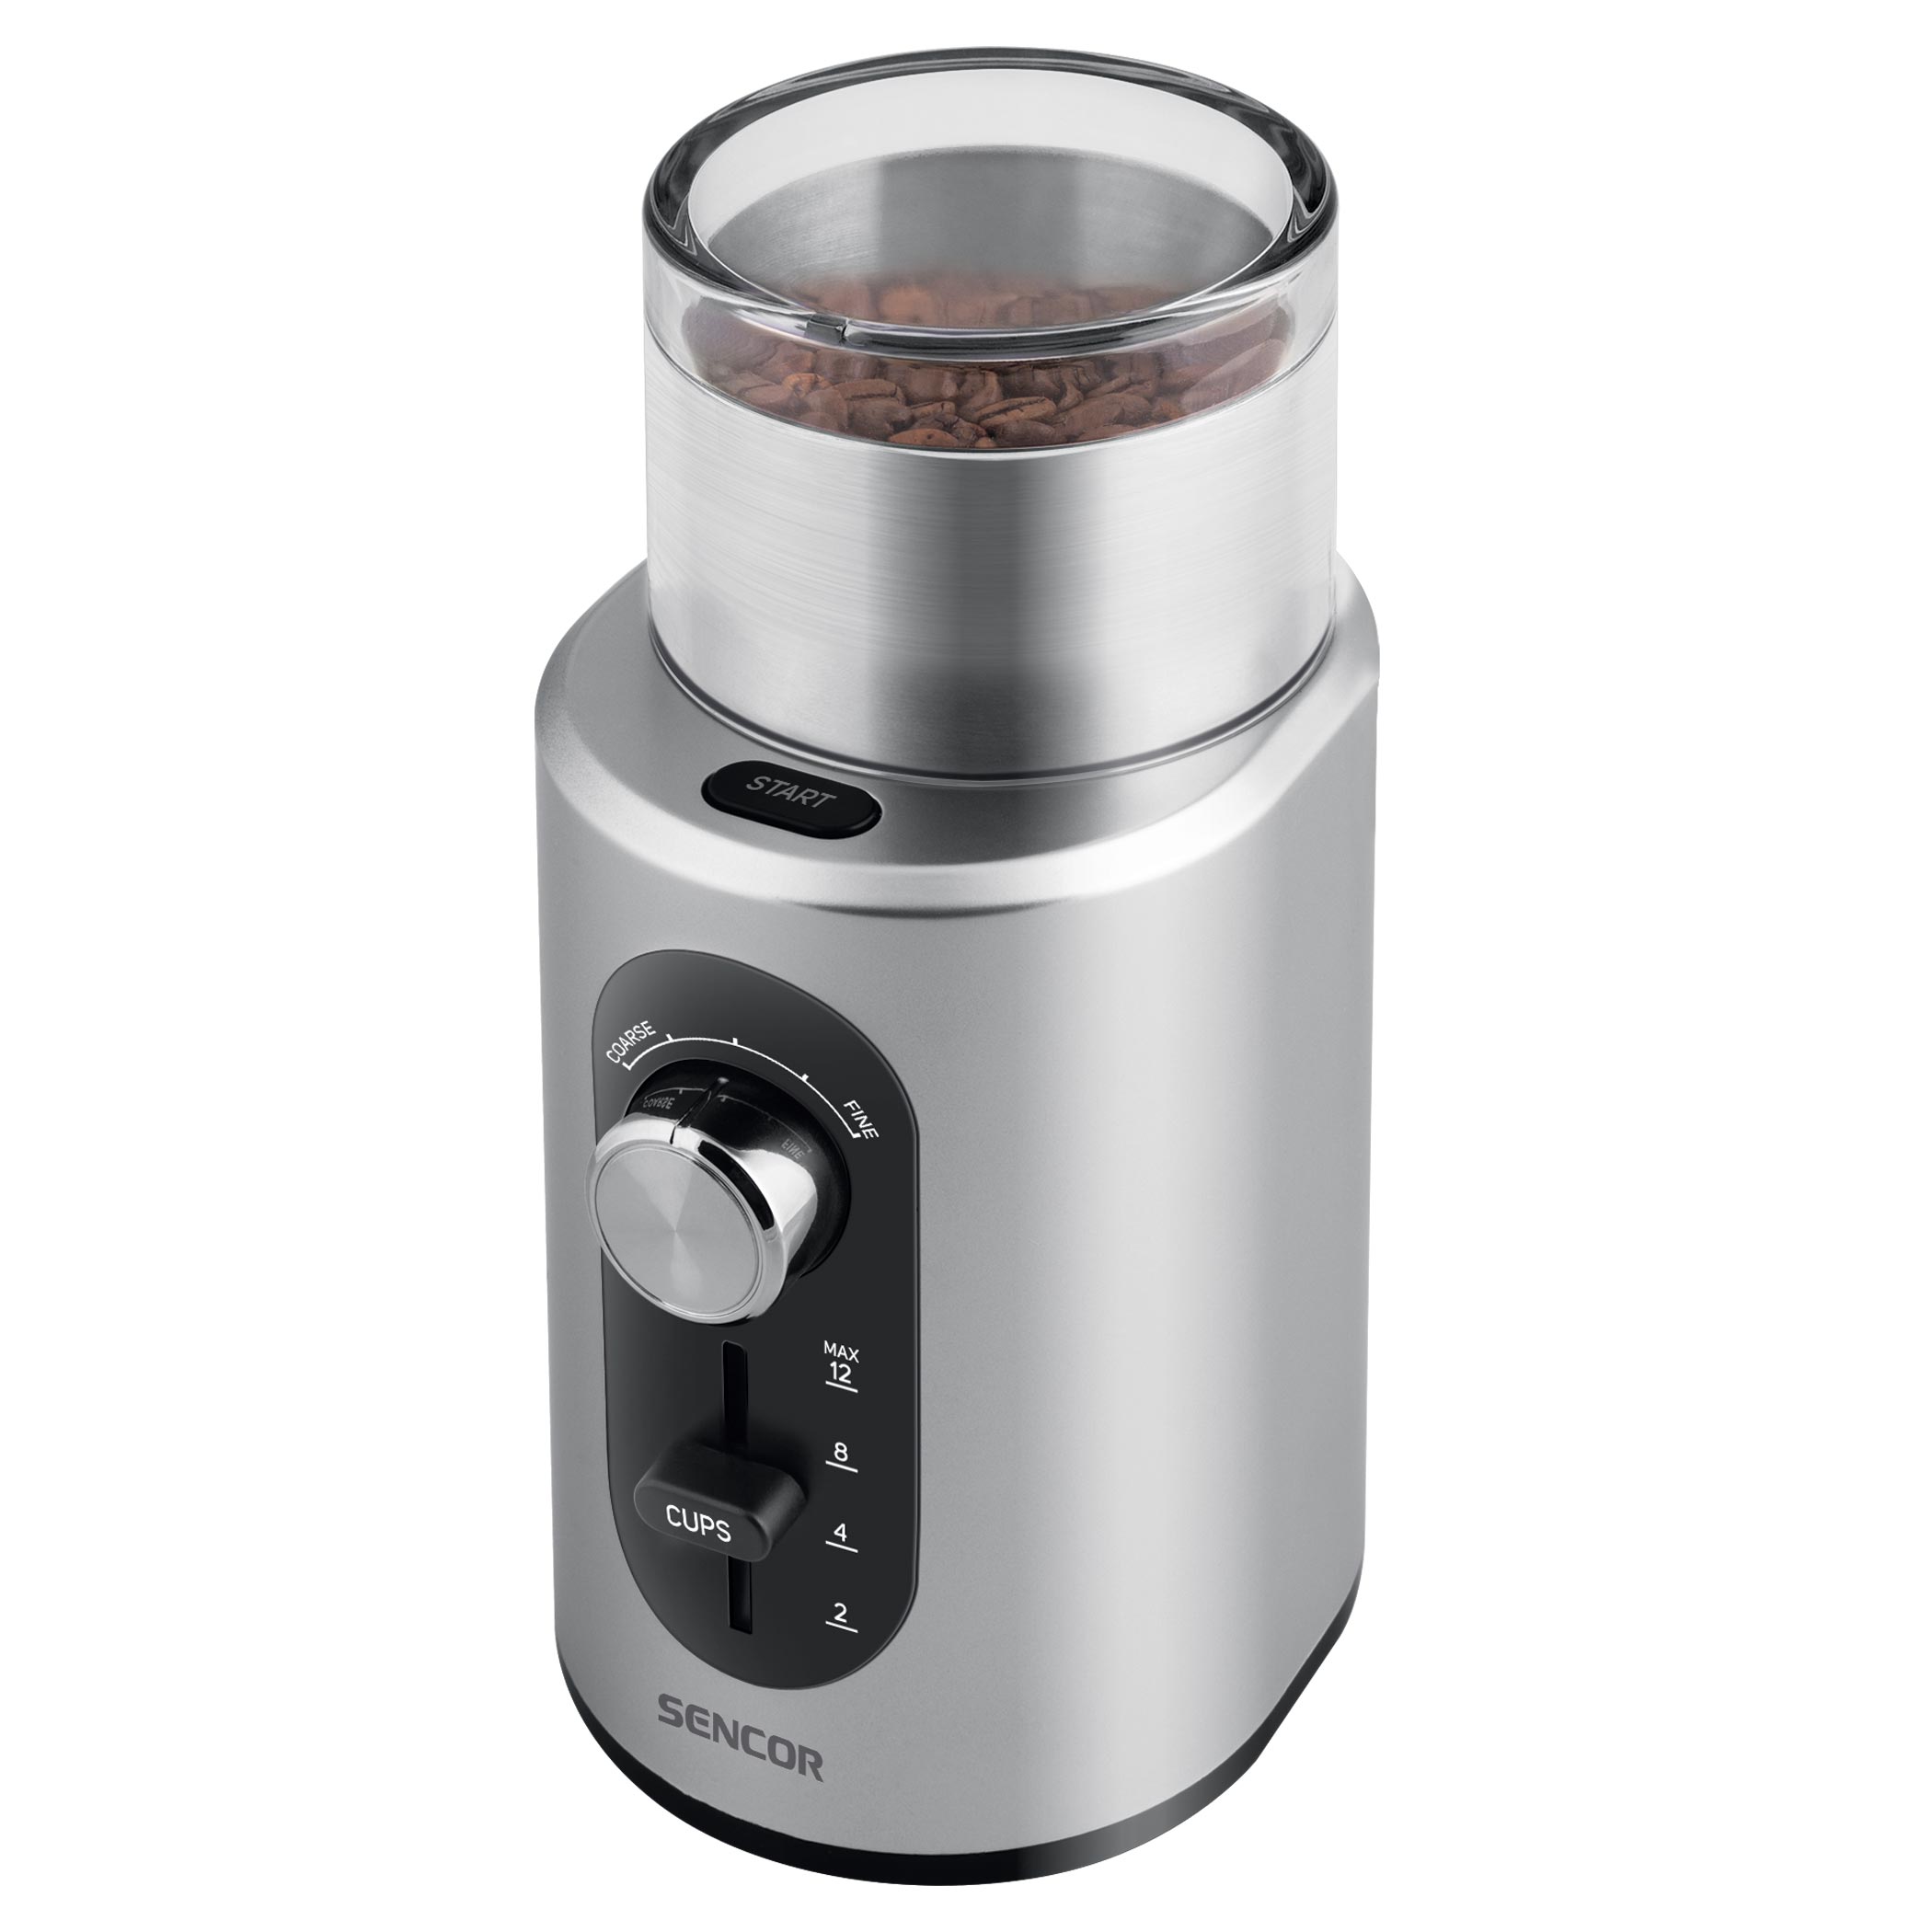 Electric coffee grinder, SCG 3550SS